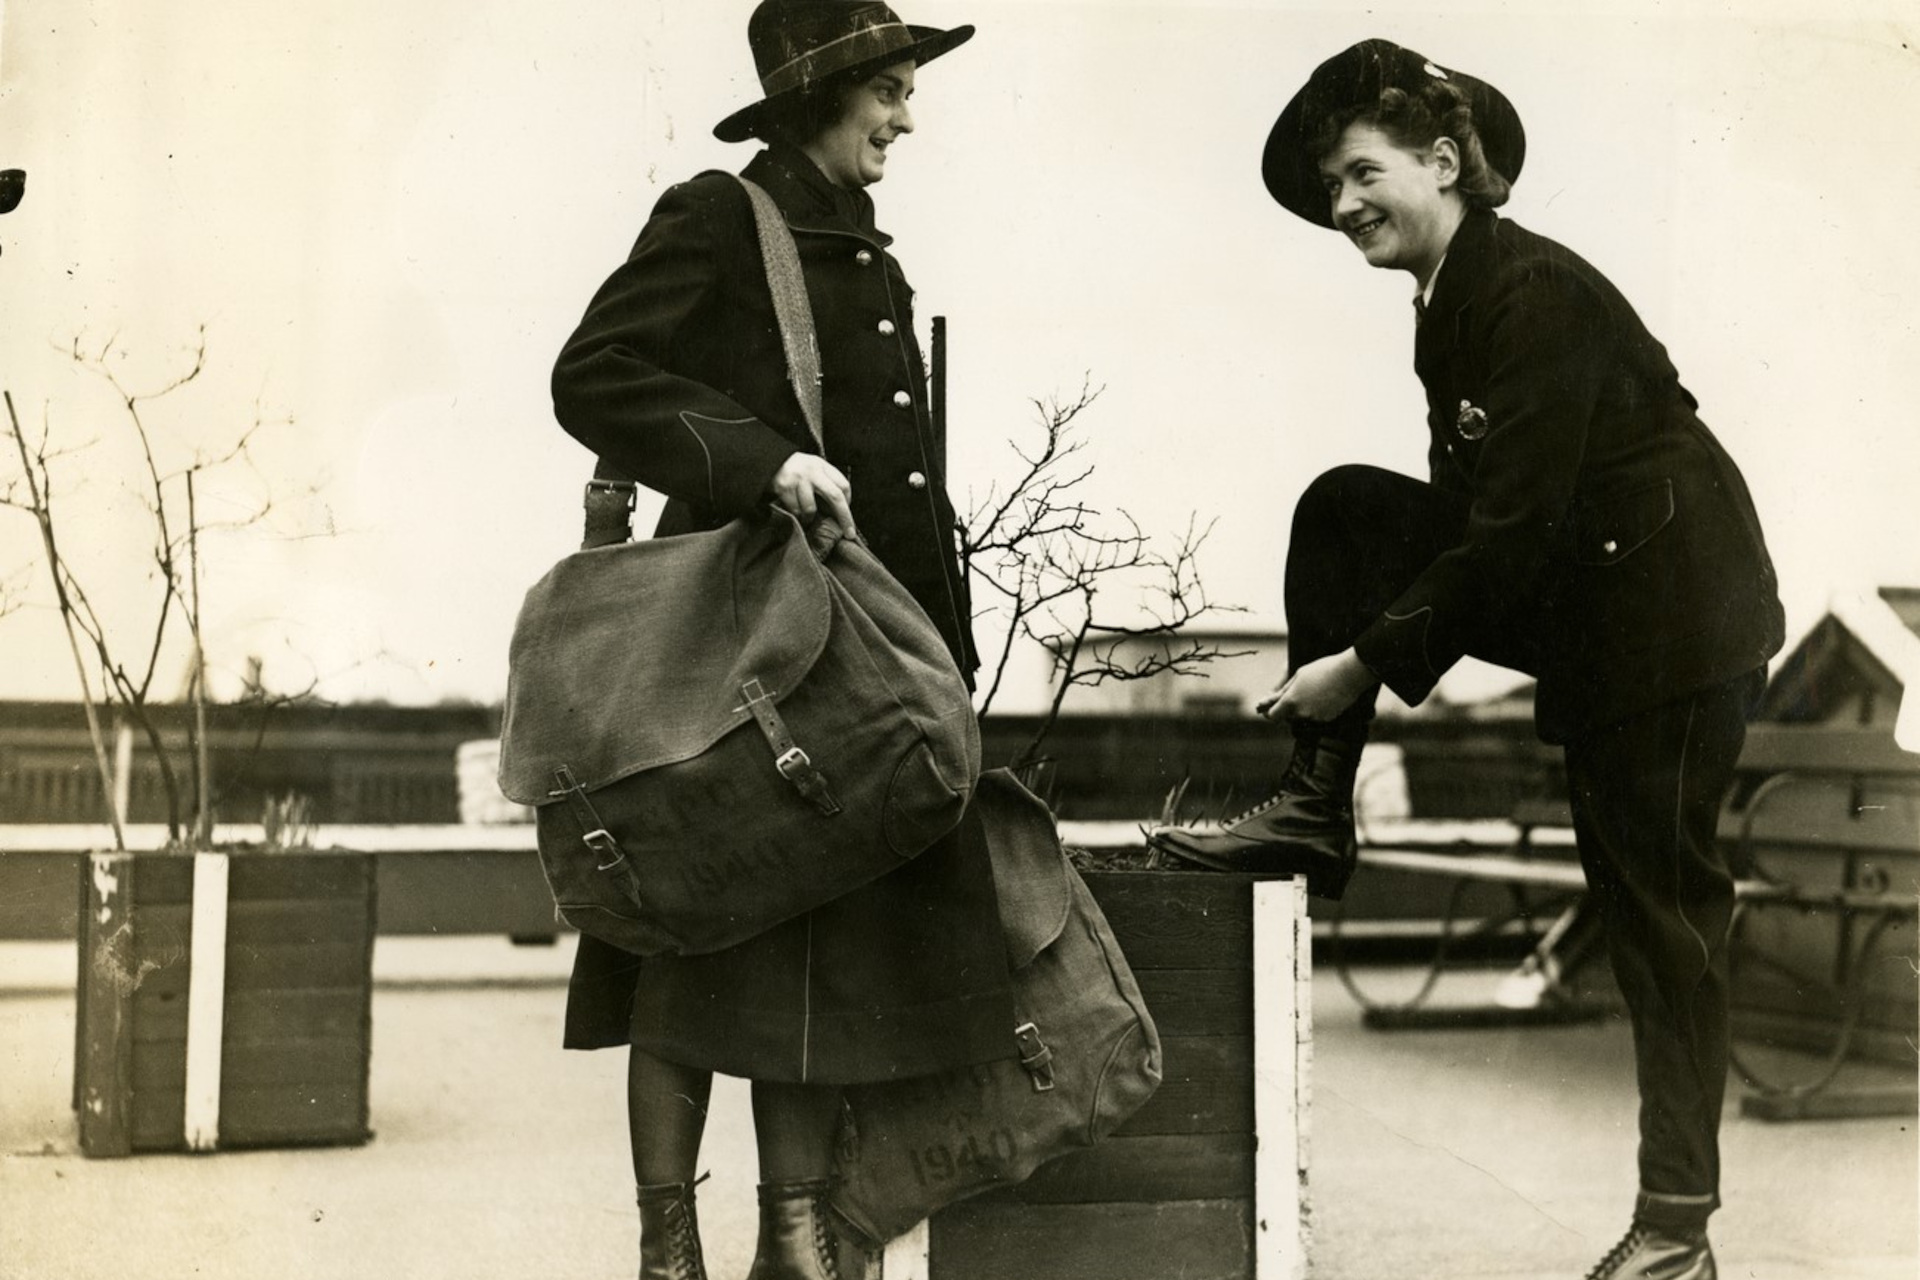 Postwomen, one of whom is wearing 'Camerons'